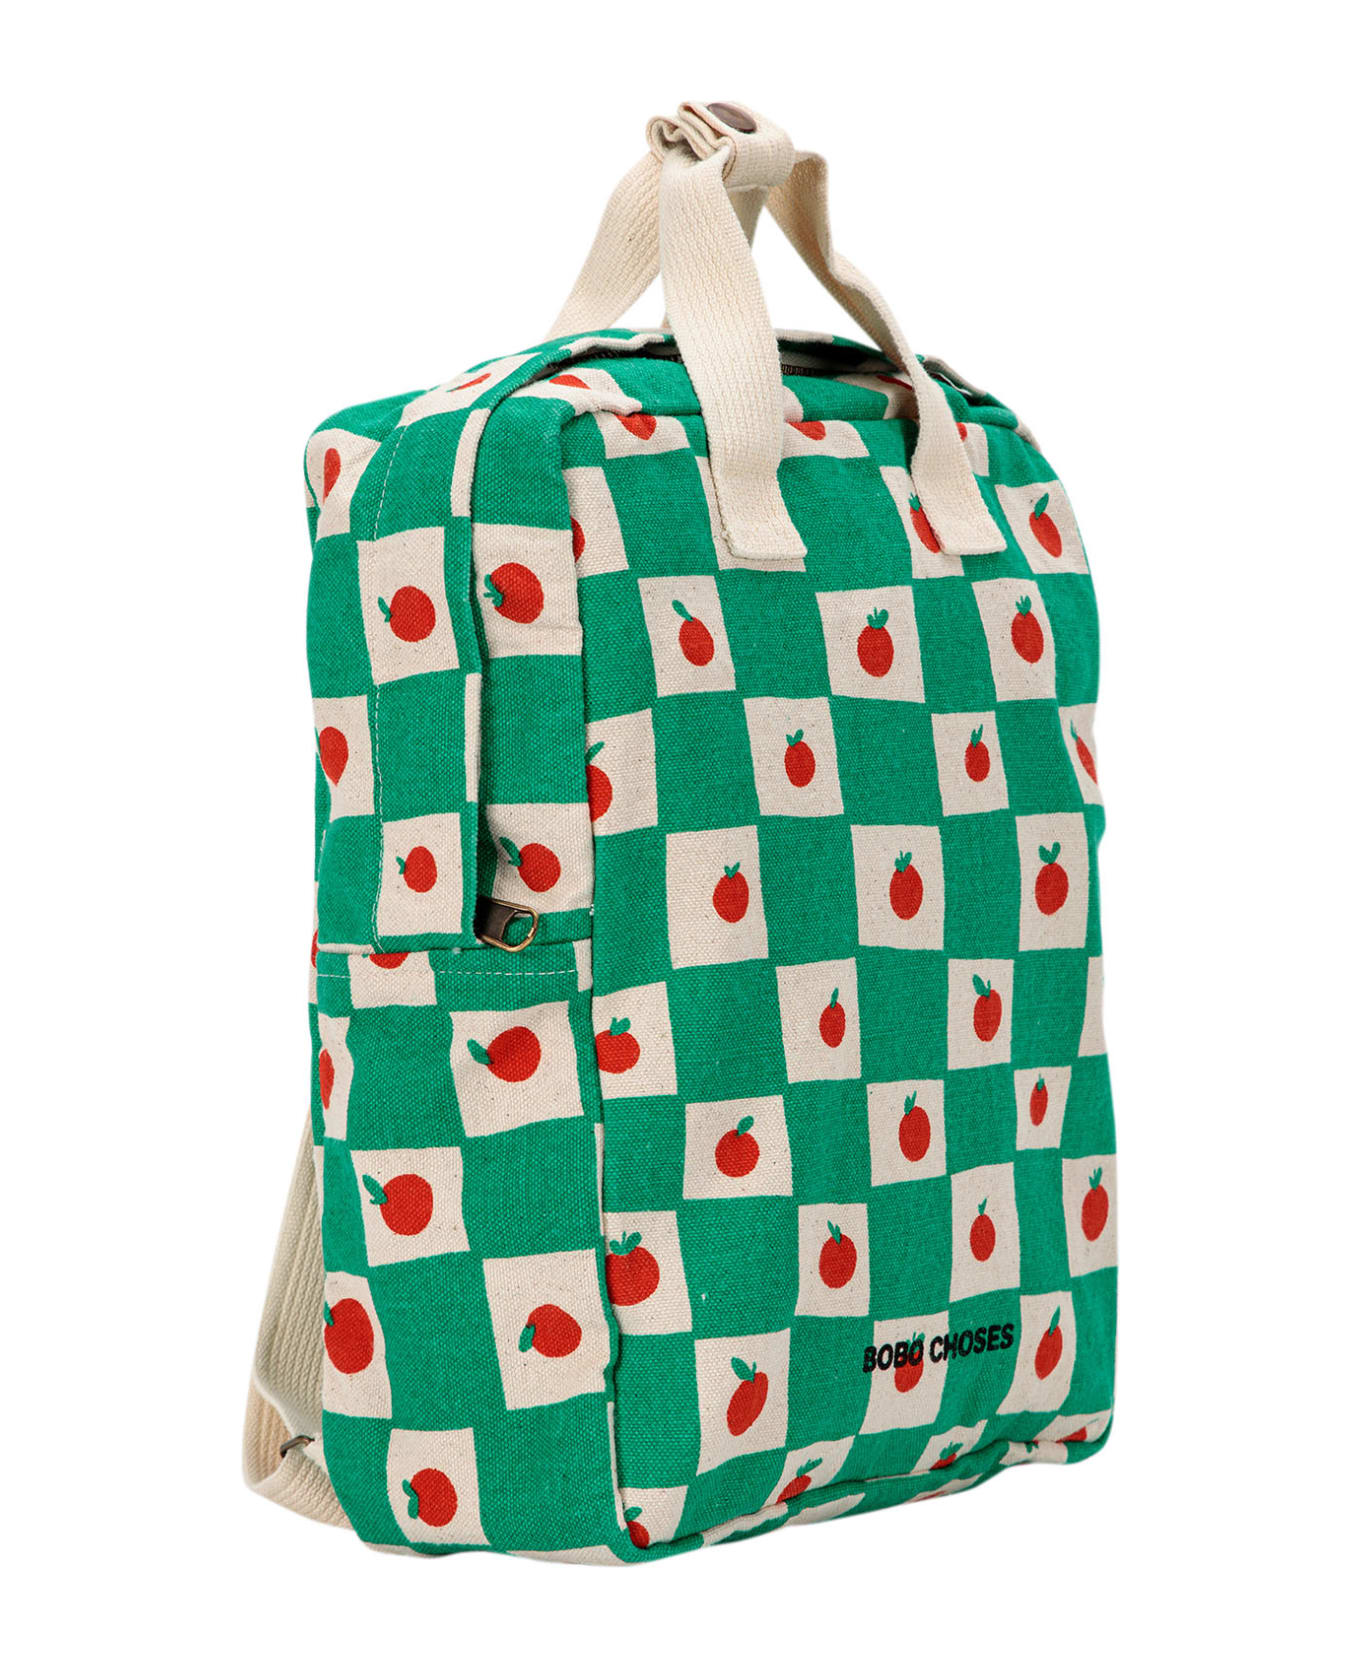 Bobo Choses Green Backpack With Tomatoes For Kids - Green